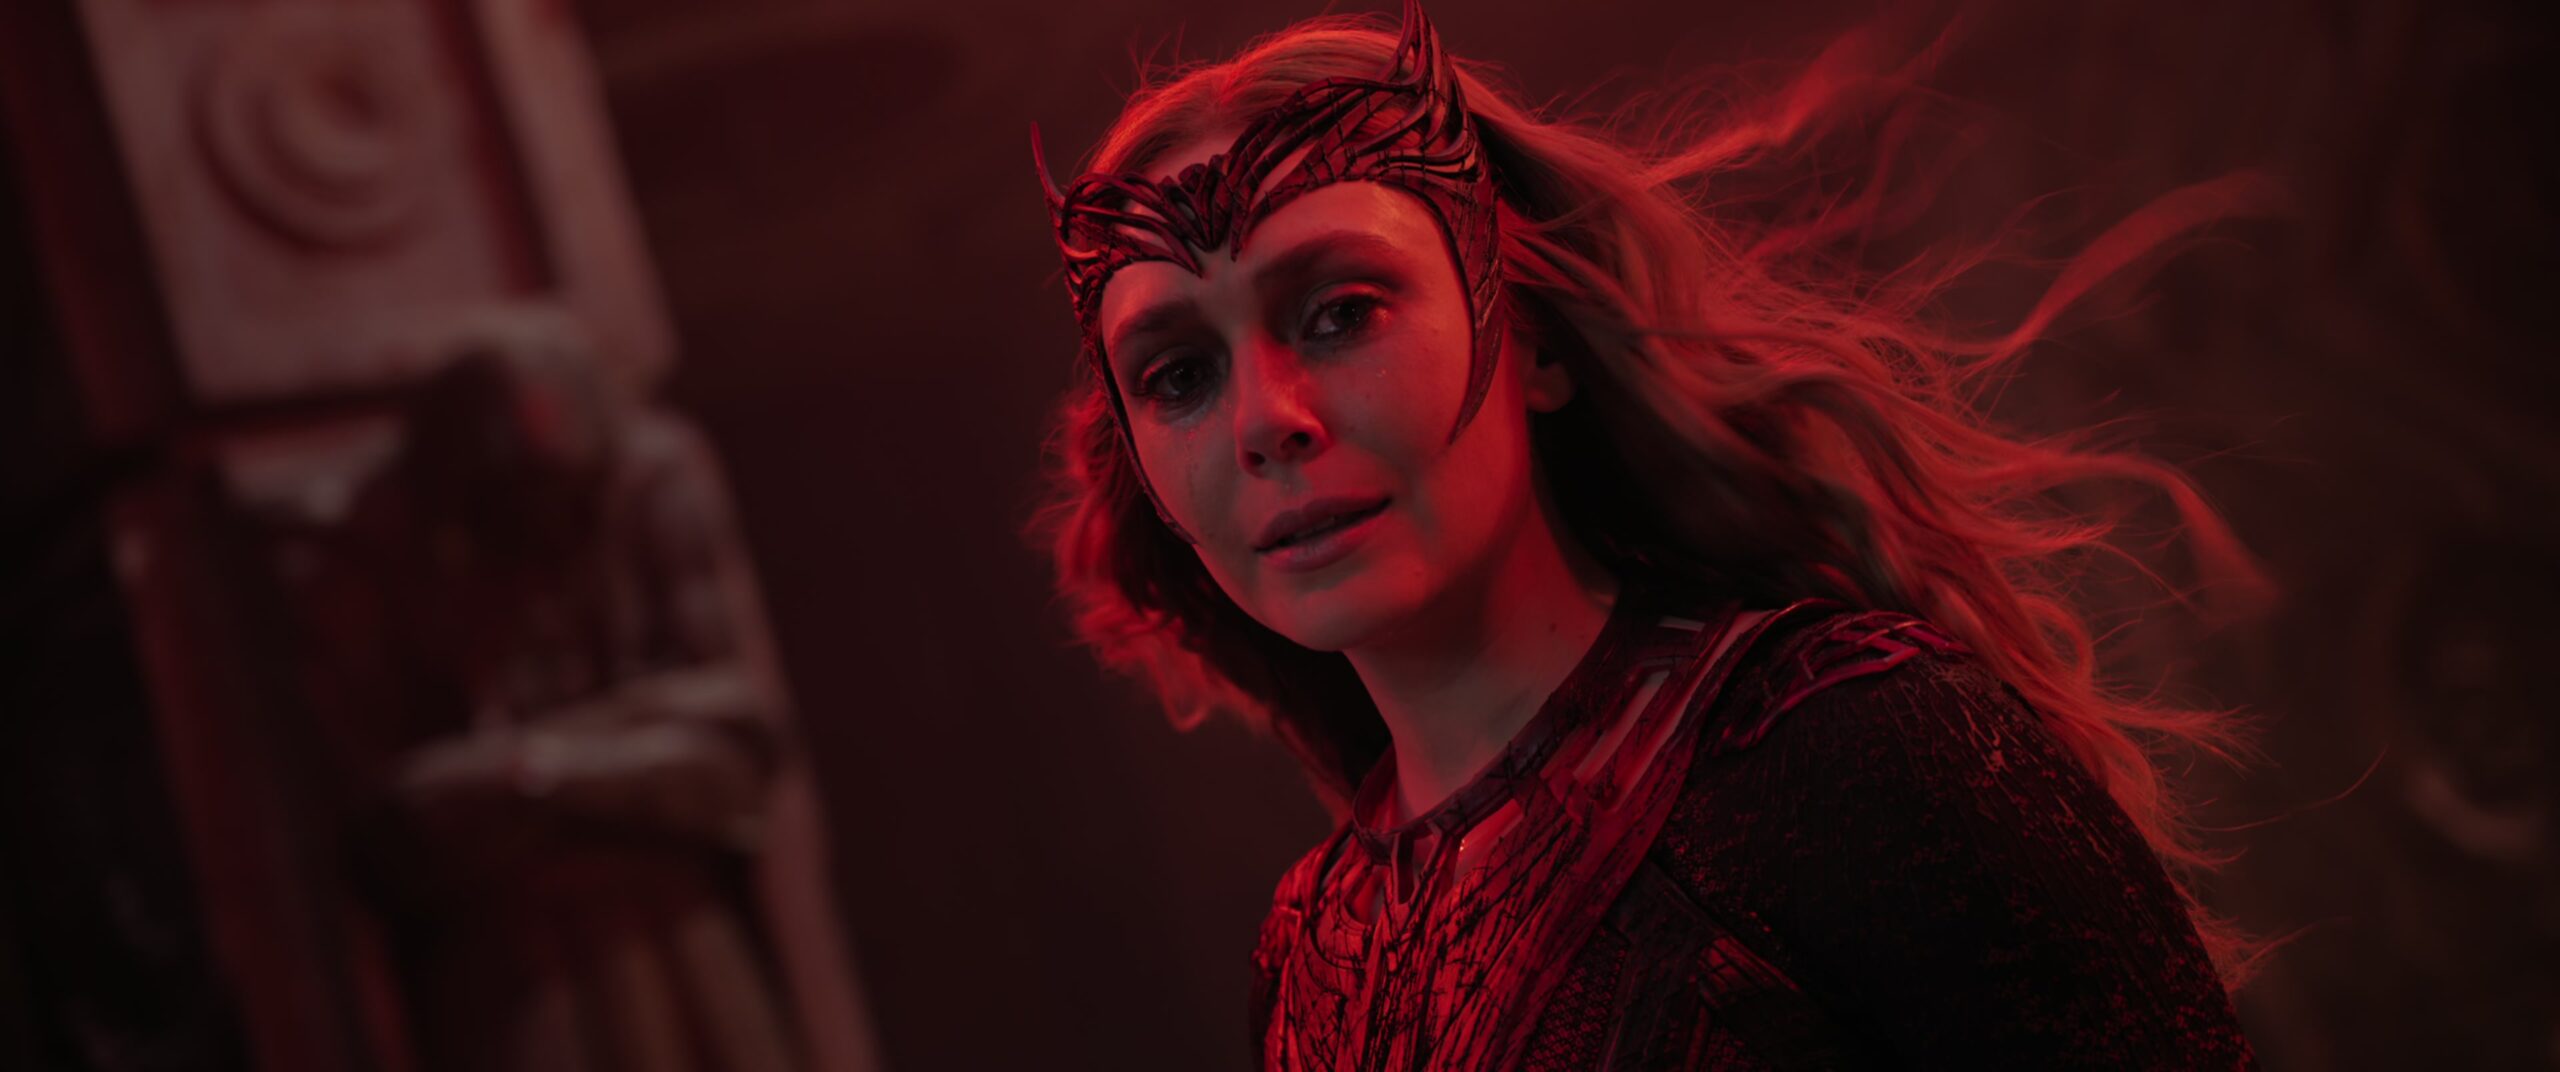 The Scarlet Witch (Elizabeth Olsen) realizes the futility of her pursuits in Doctor Strange in the Multiverse of Madness (2022), Marvel Entertainment